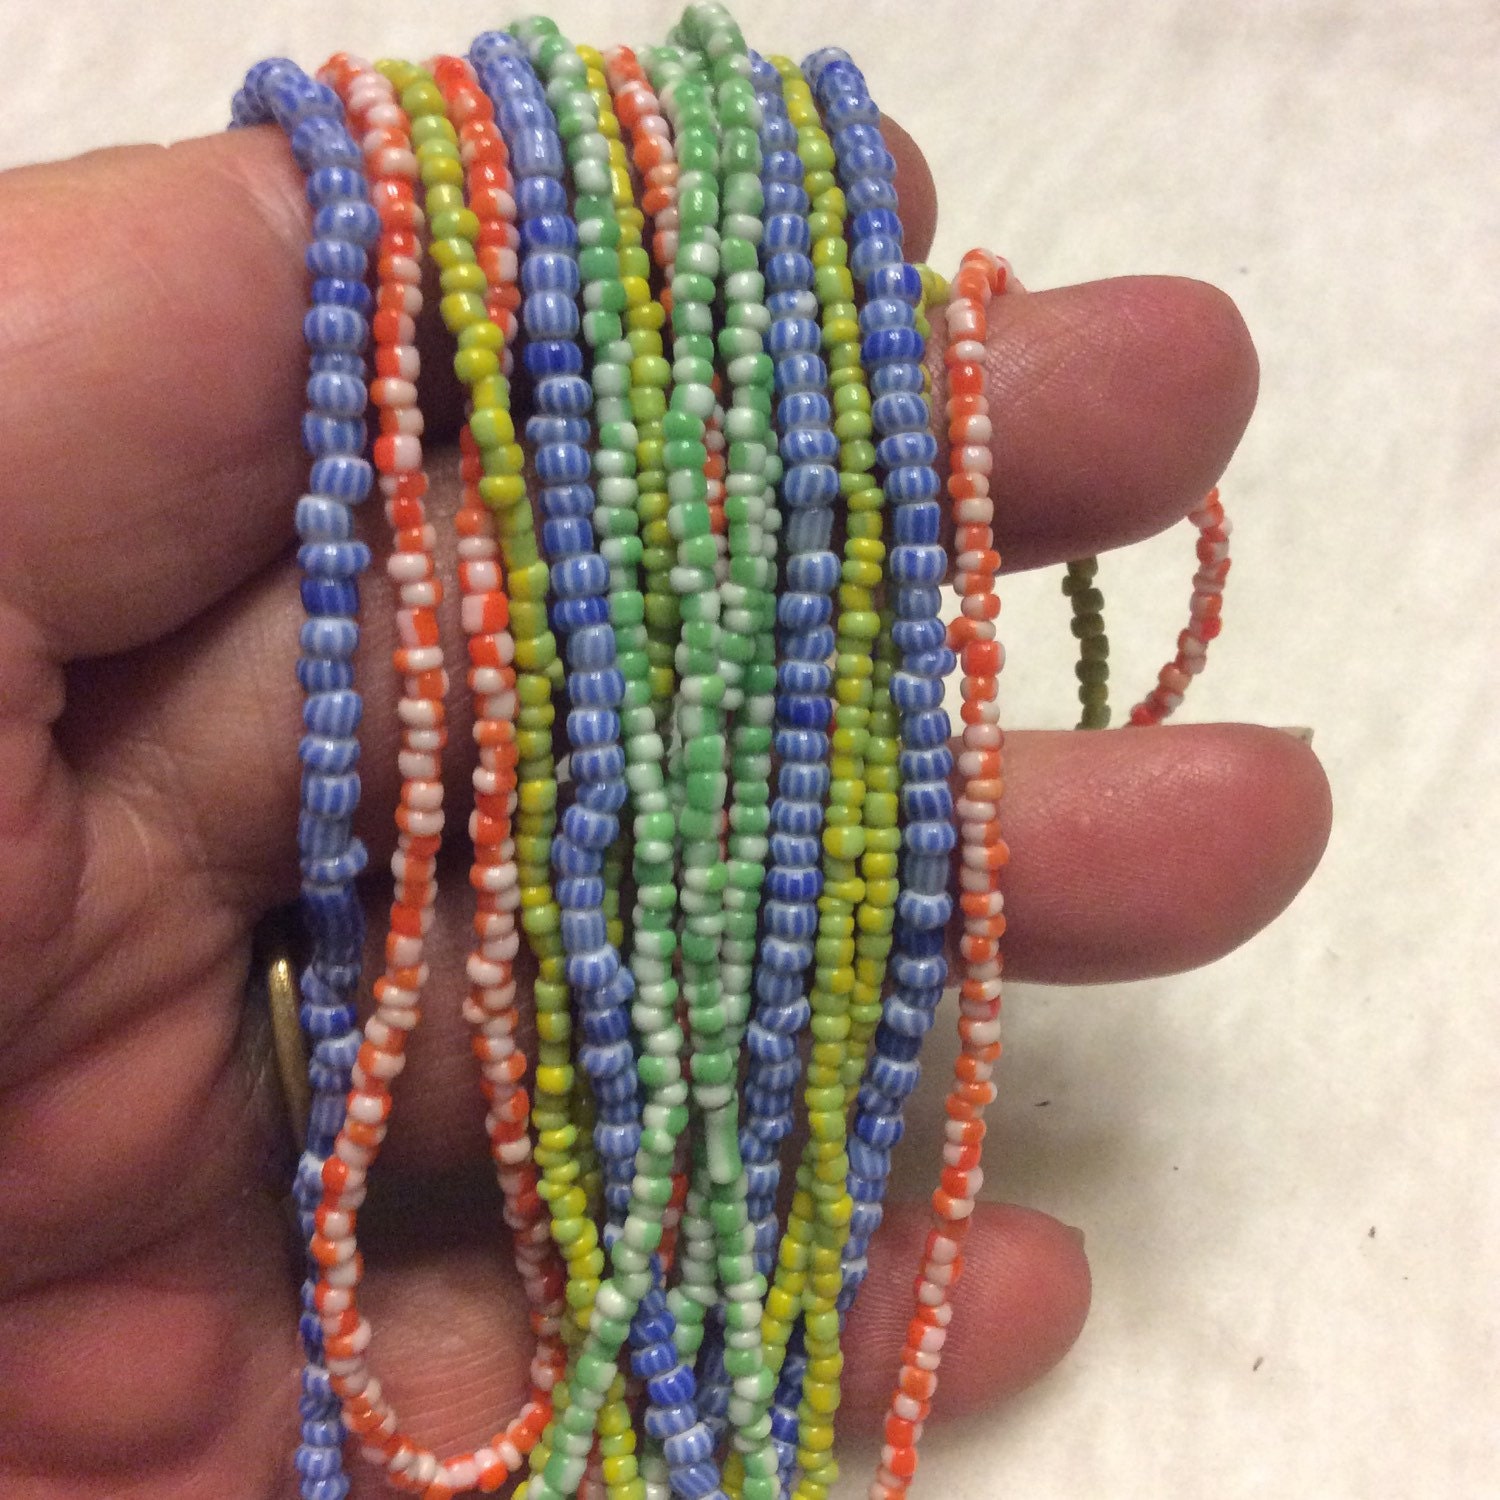 Multi Colored Micro Beads 4 Strand Necklace. - Etsy